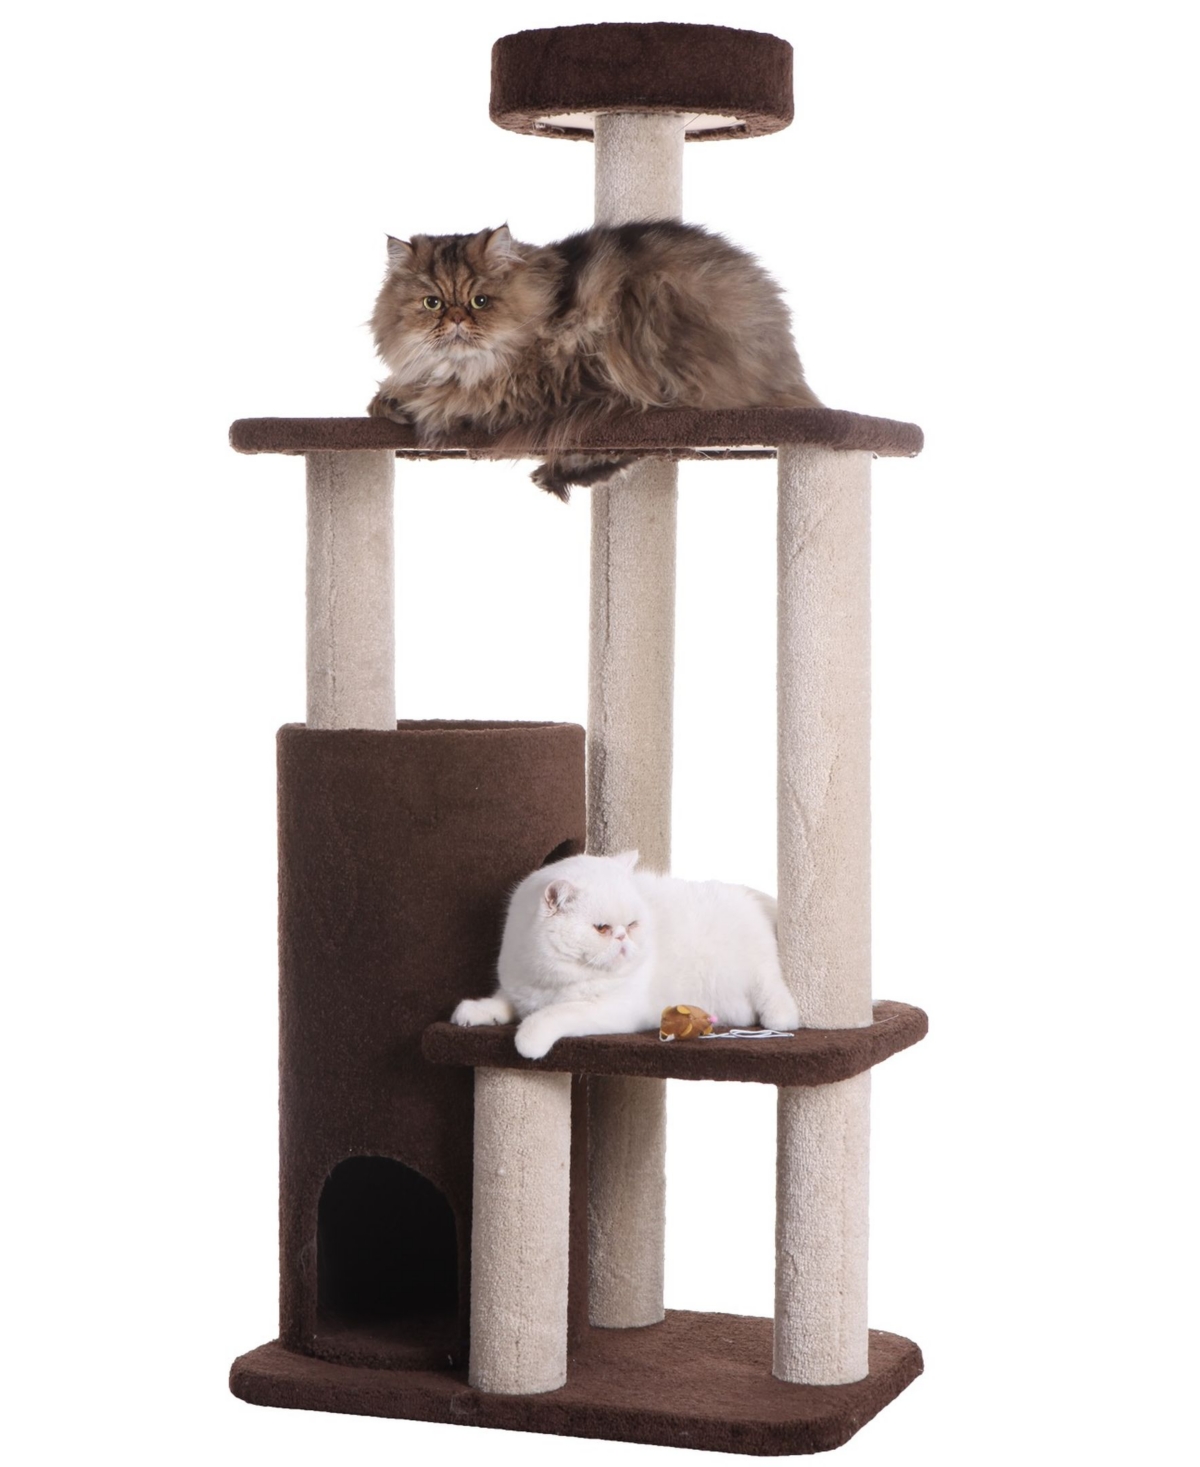 3-Level Carpeted Real Wood Cat Tree Condo - Coffee Brown